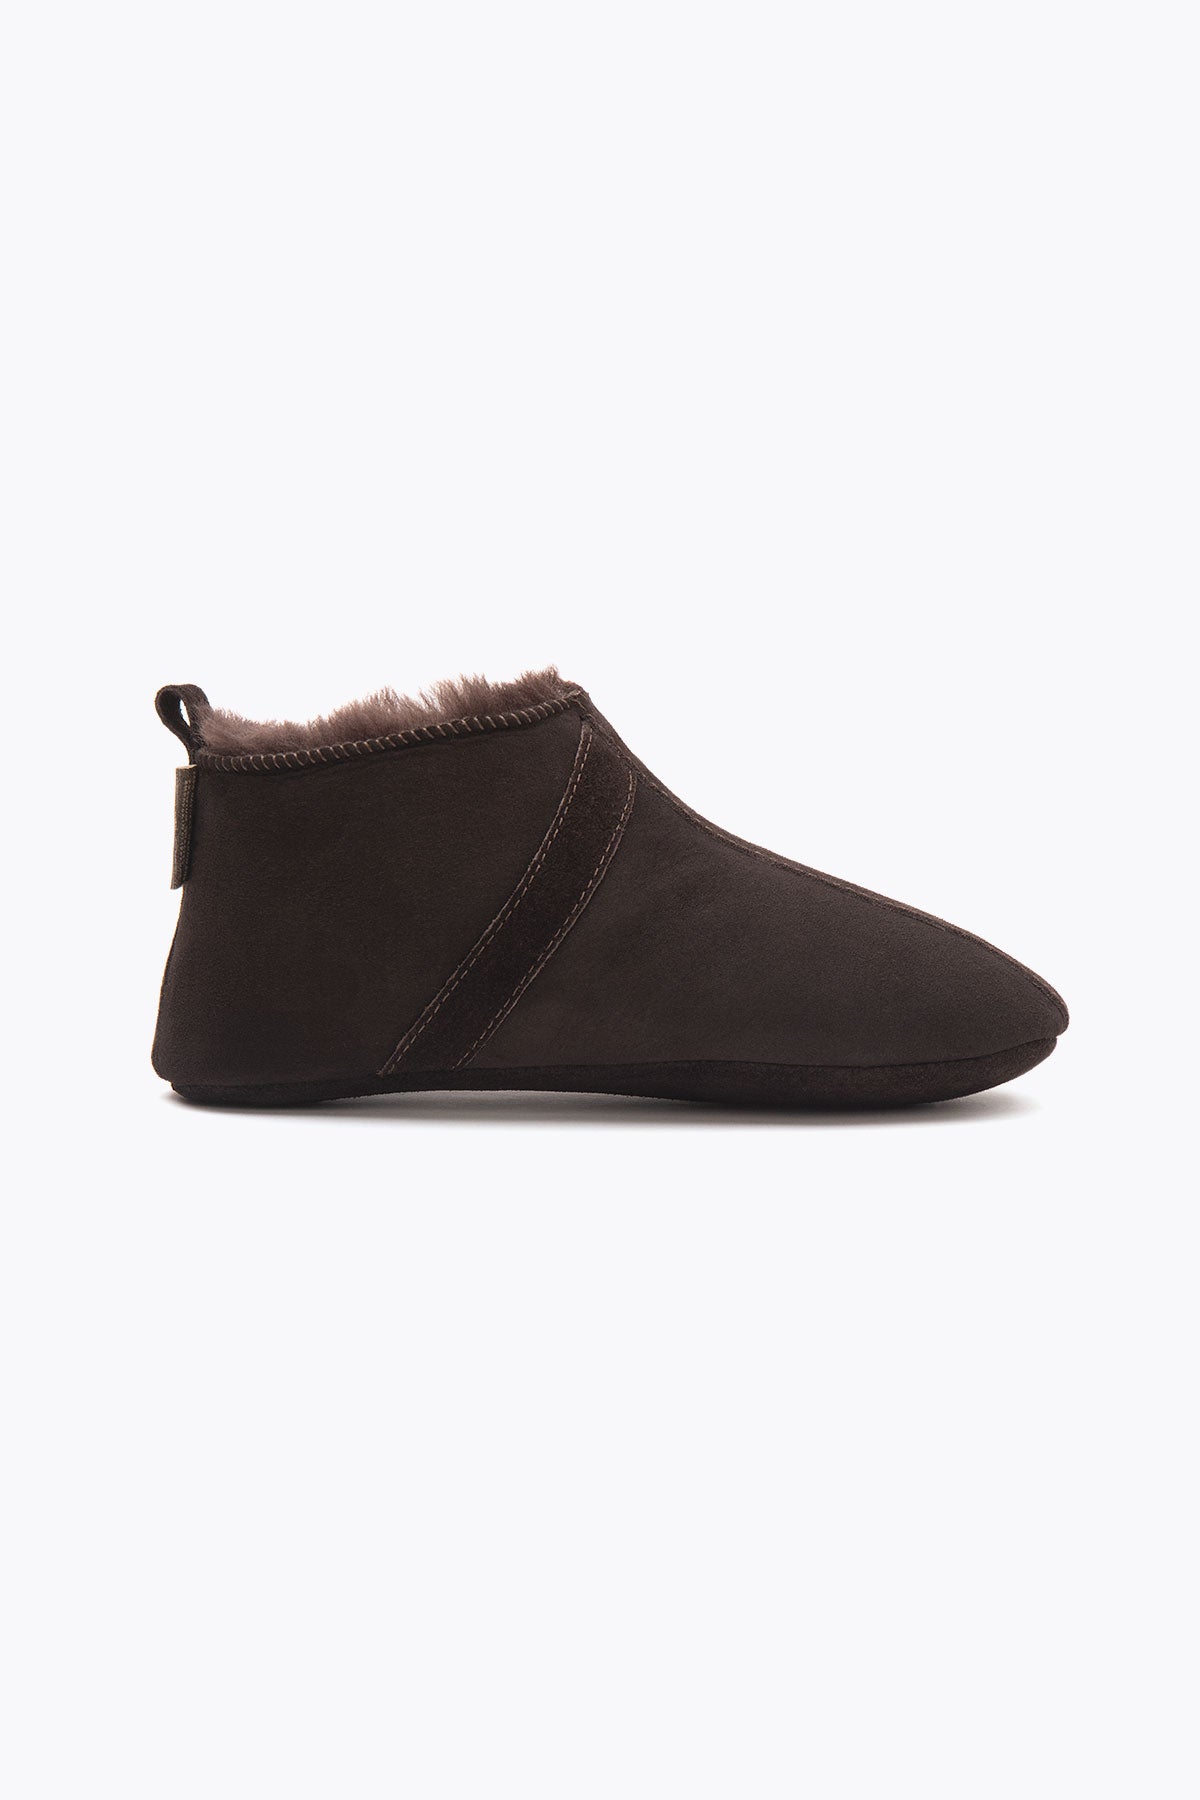 Pegia Homer Unisex Shearling Bootie Slippers